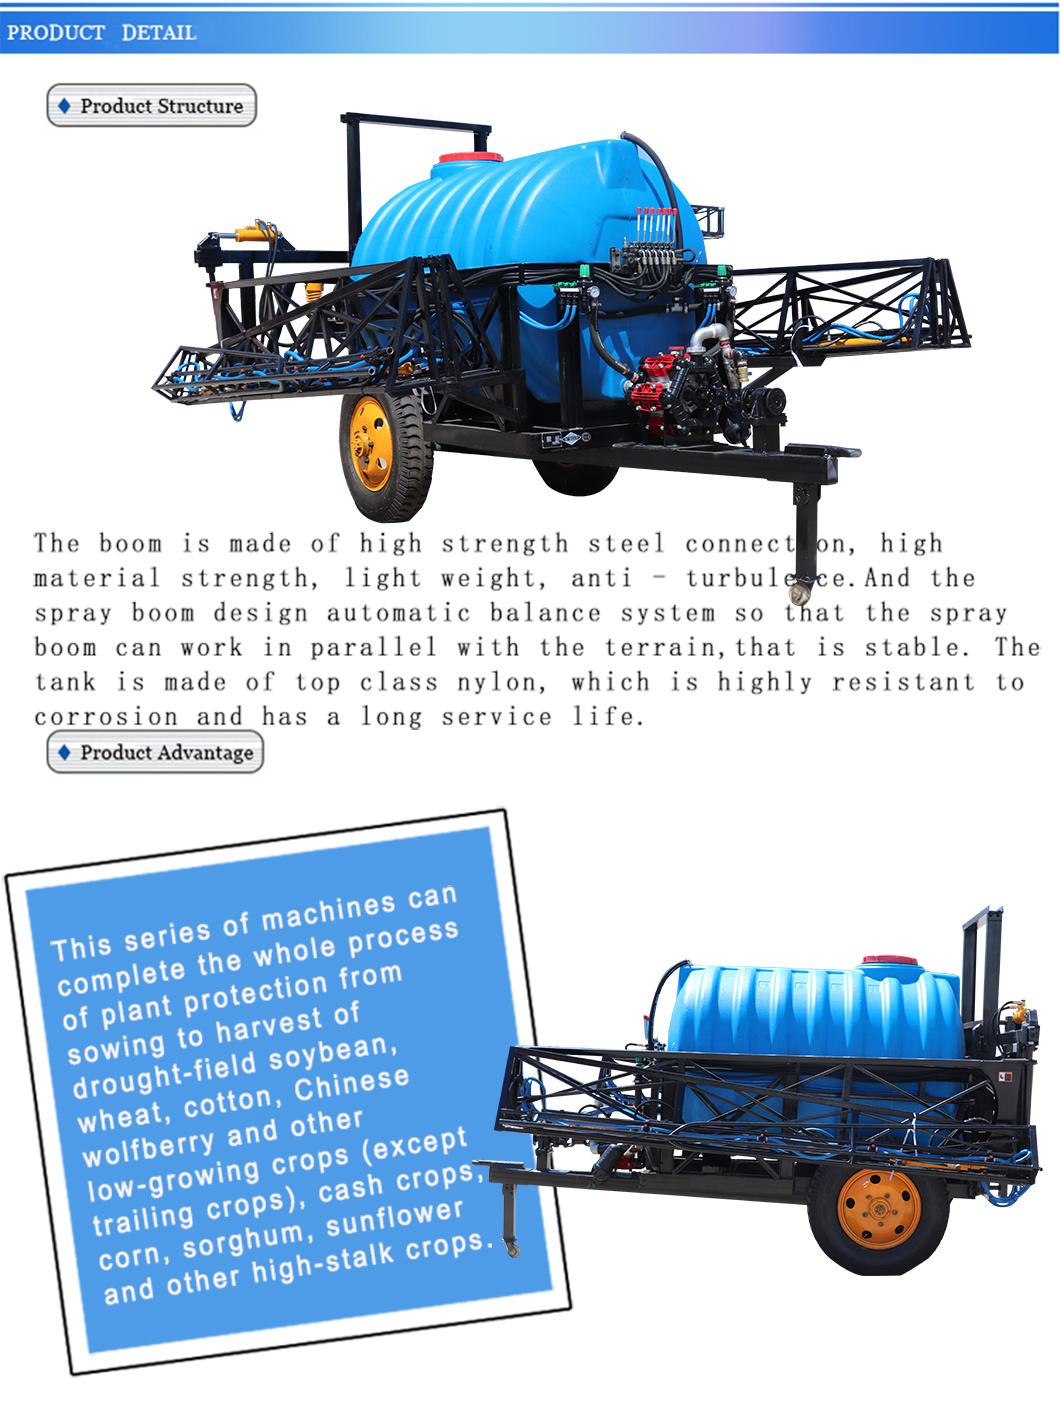 Drawn Farm Field Soybean Wheat 4WD Power Tractor Mounted Boom Agricultural Sprayer